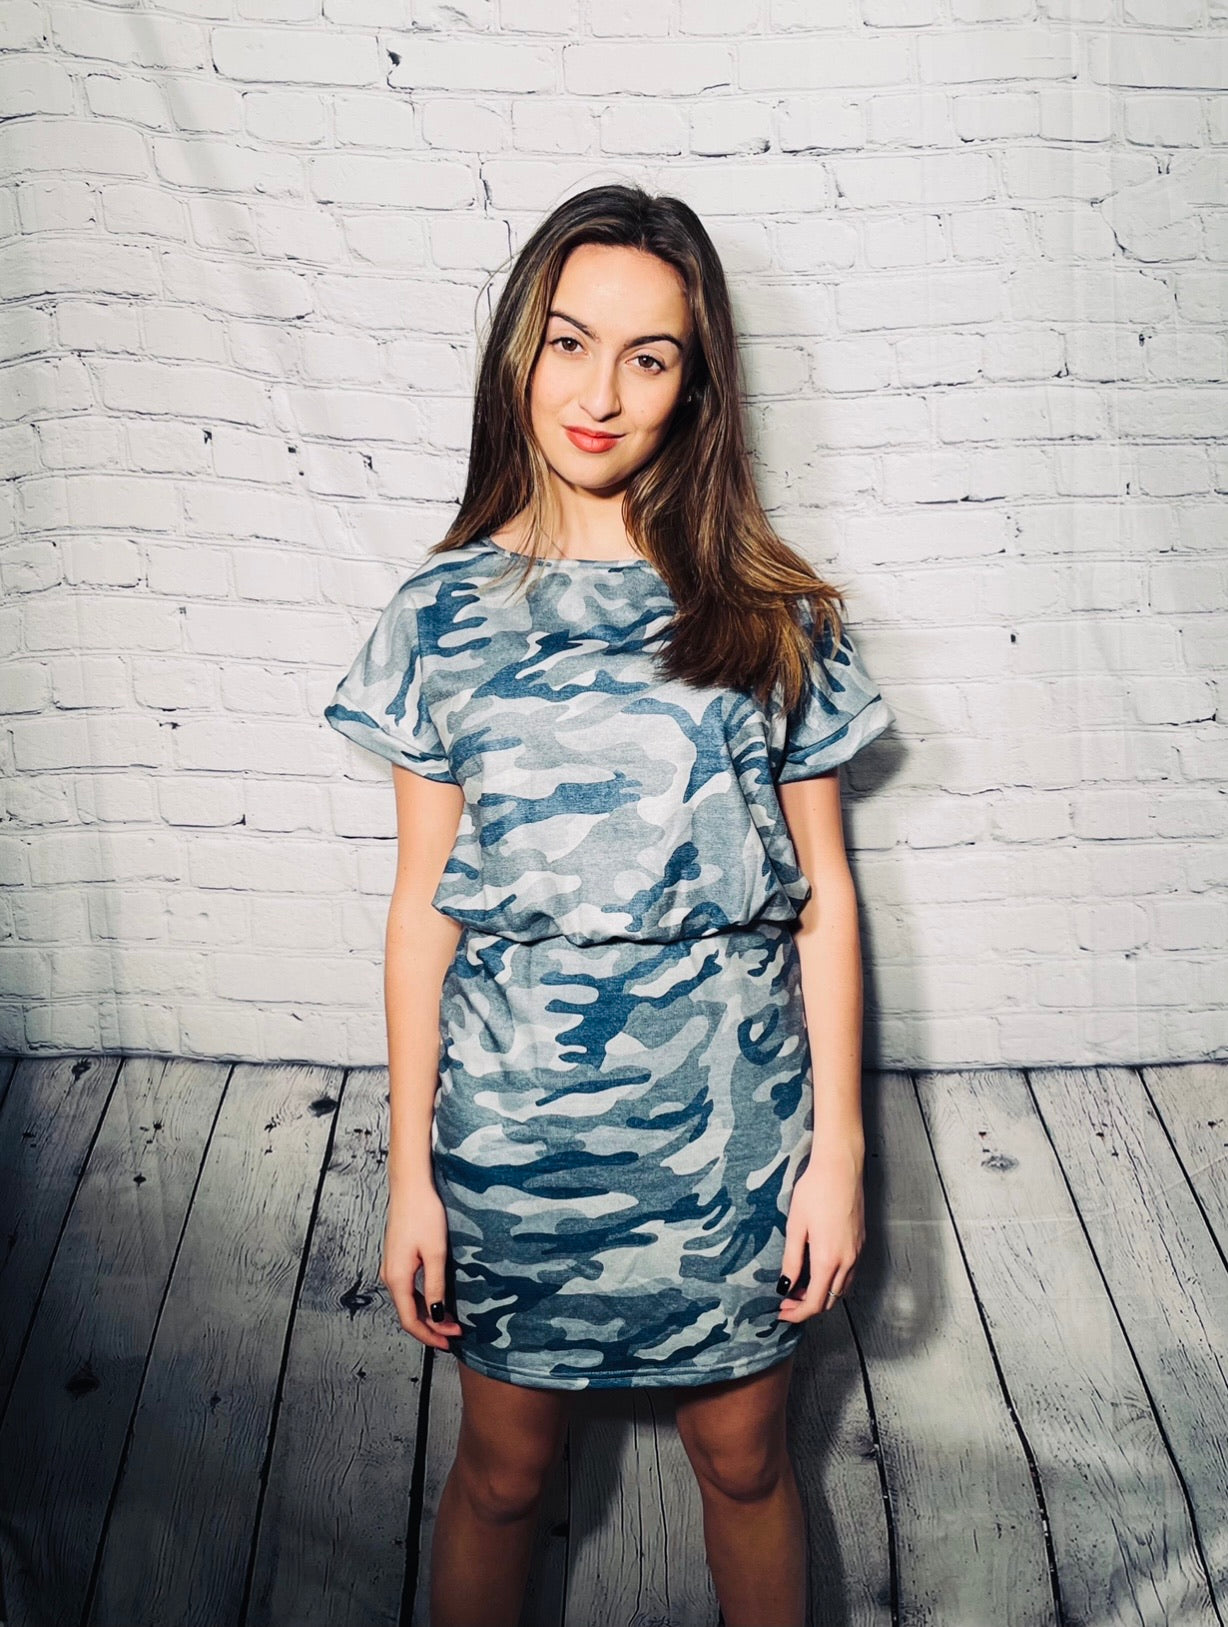 Grey and green camo dresses